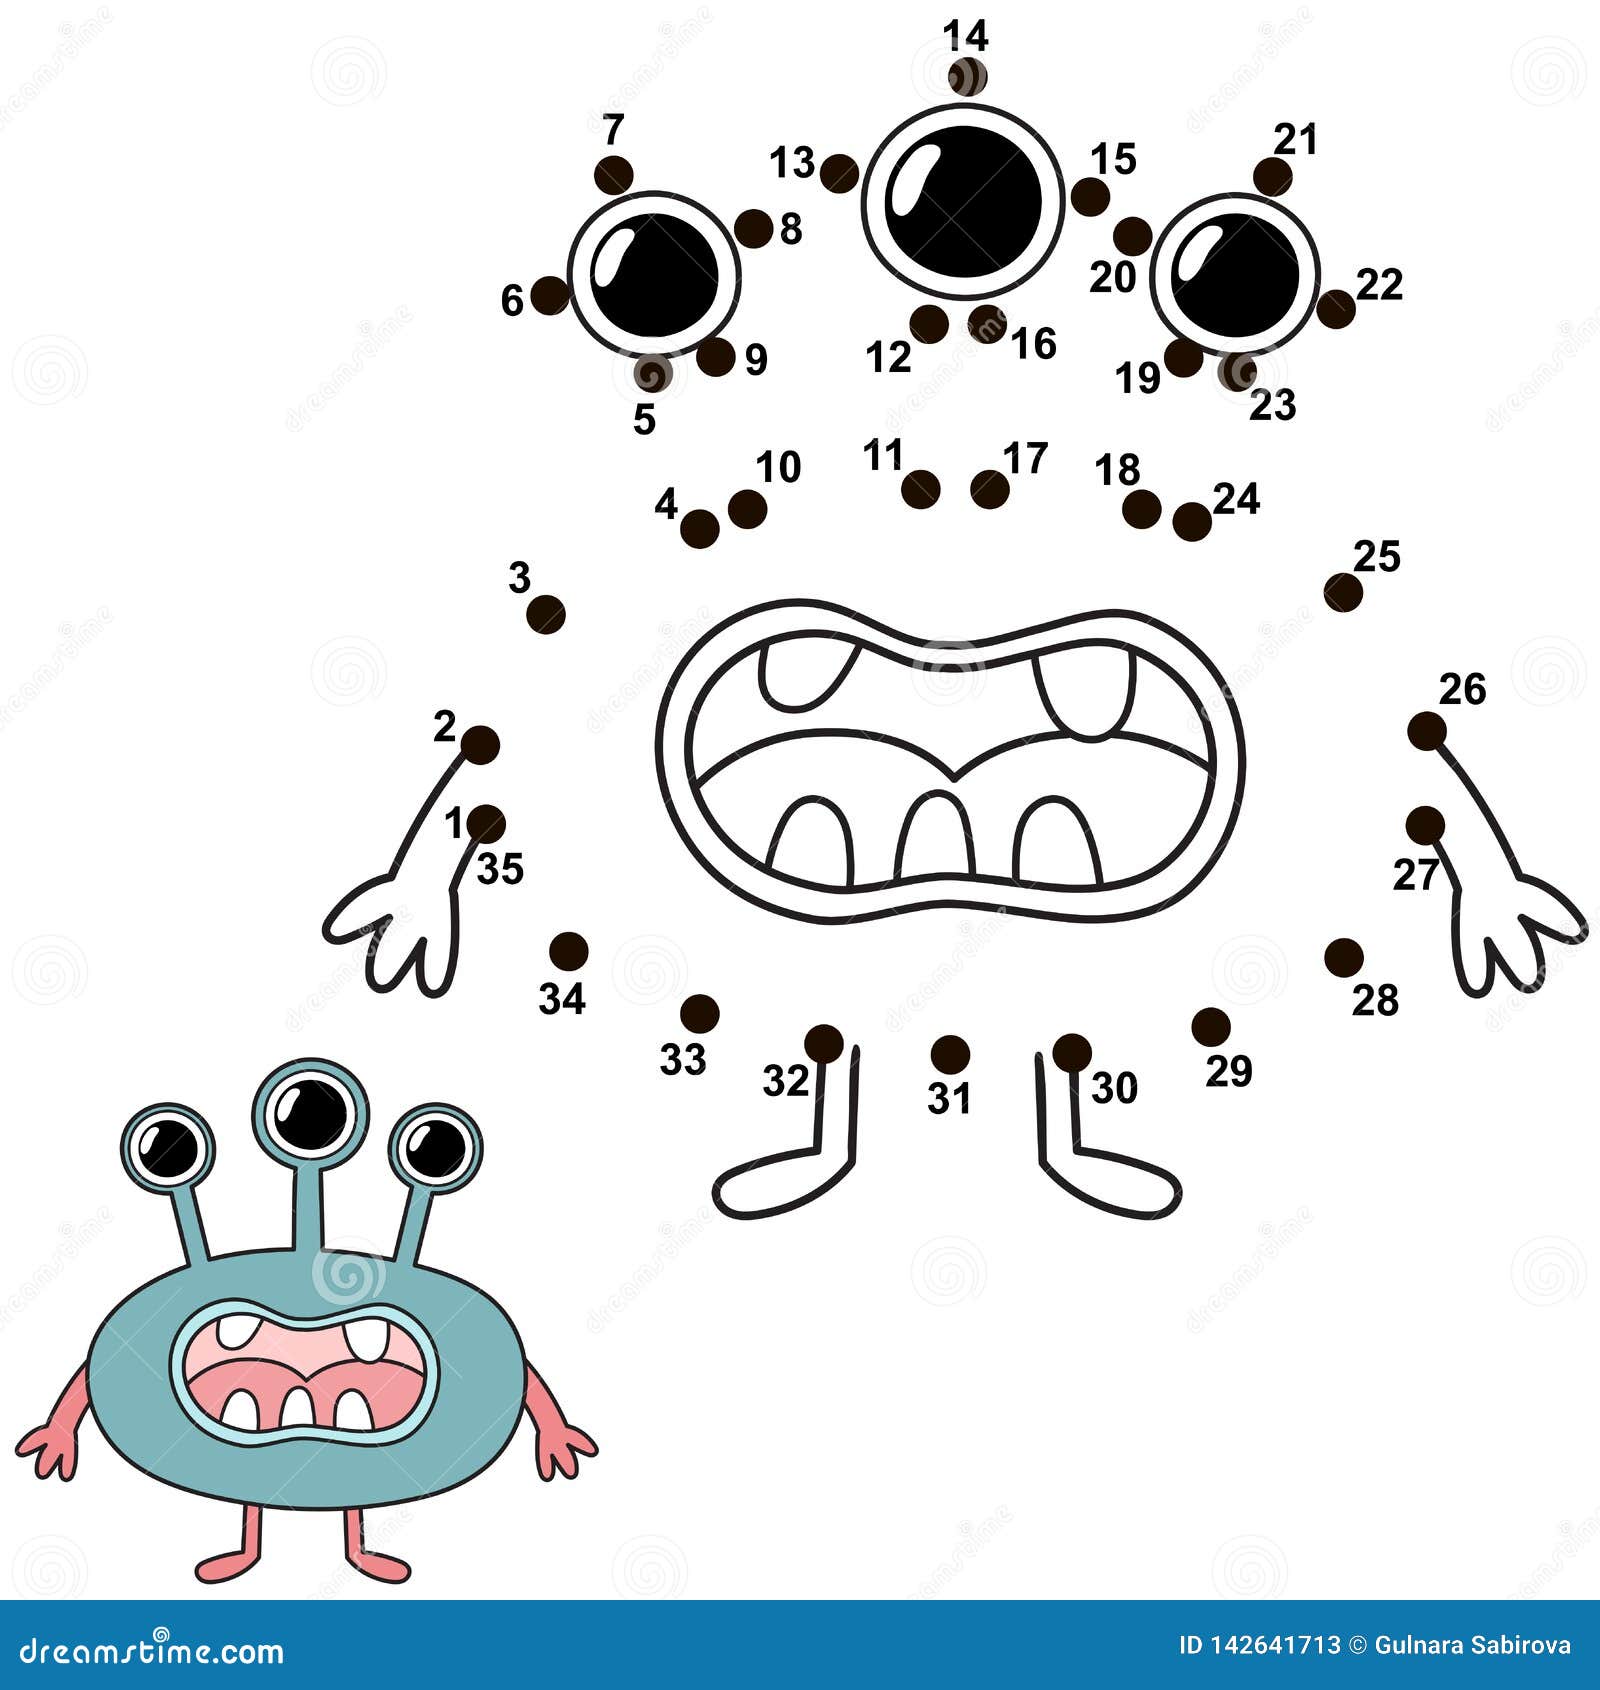 educational game connect the dots to draw a monster